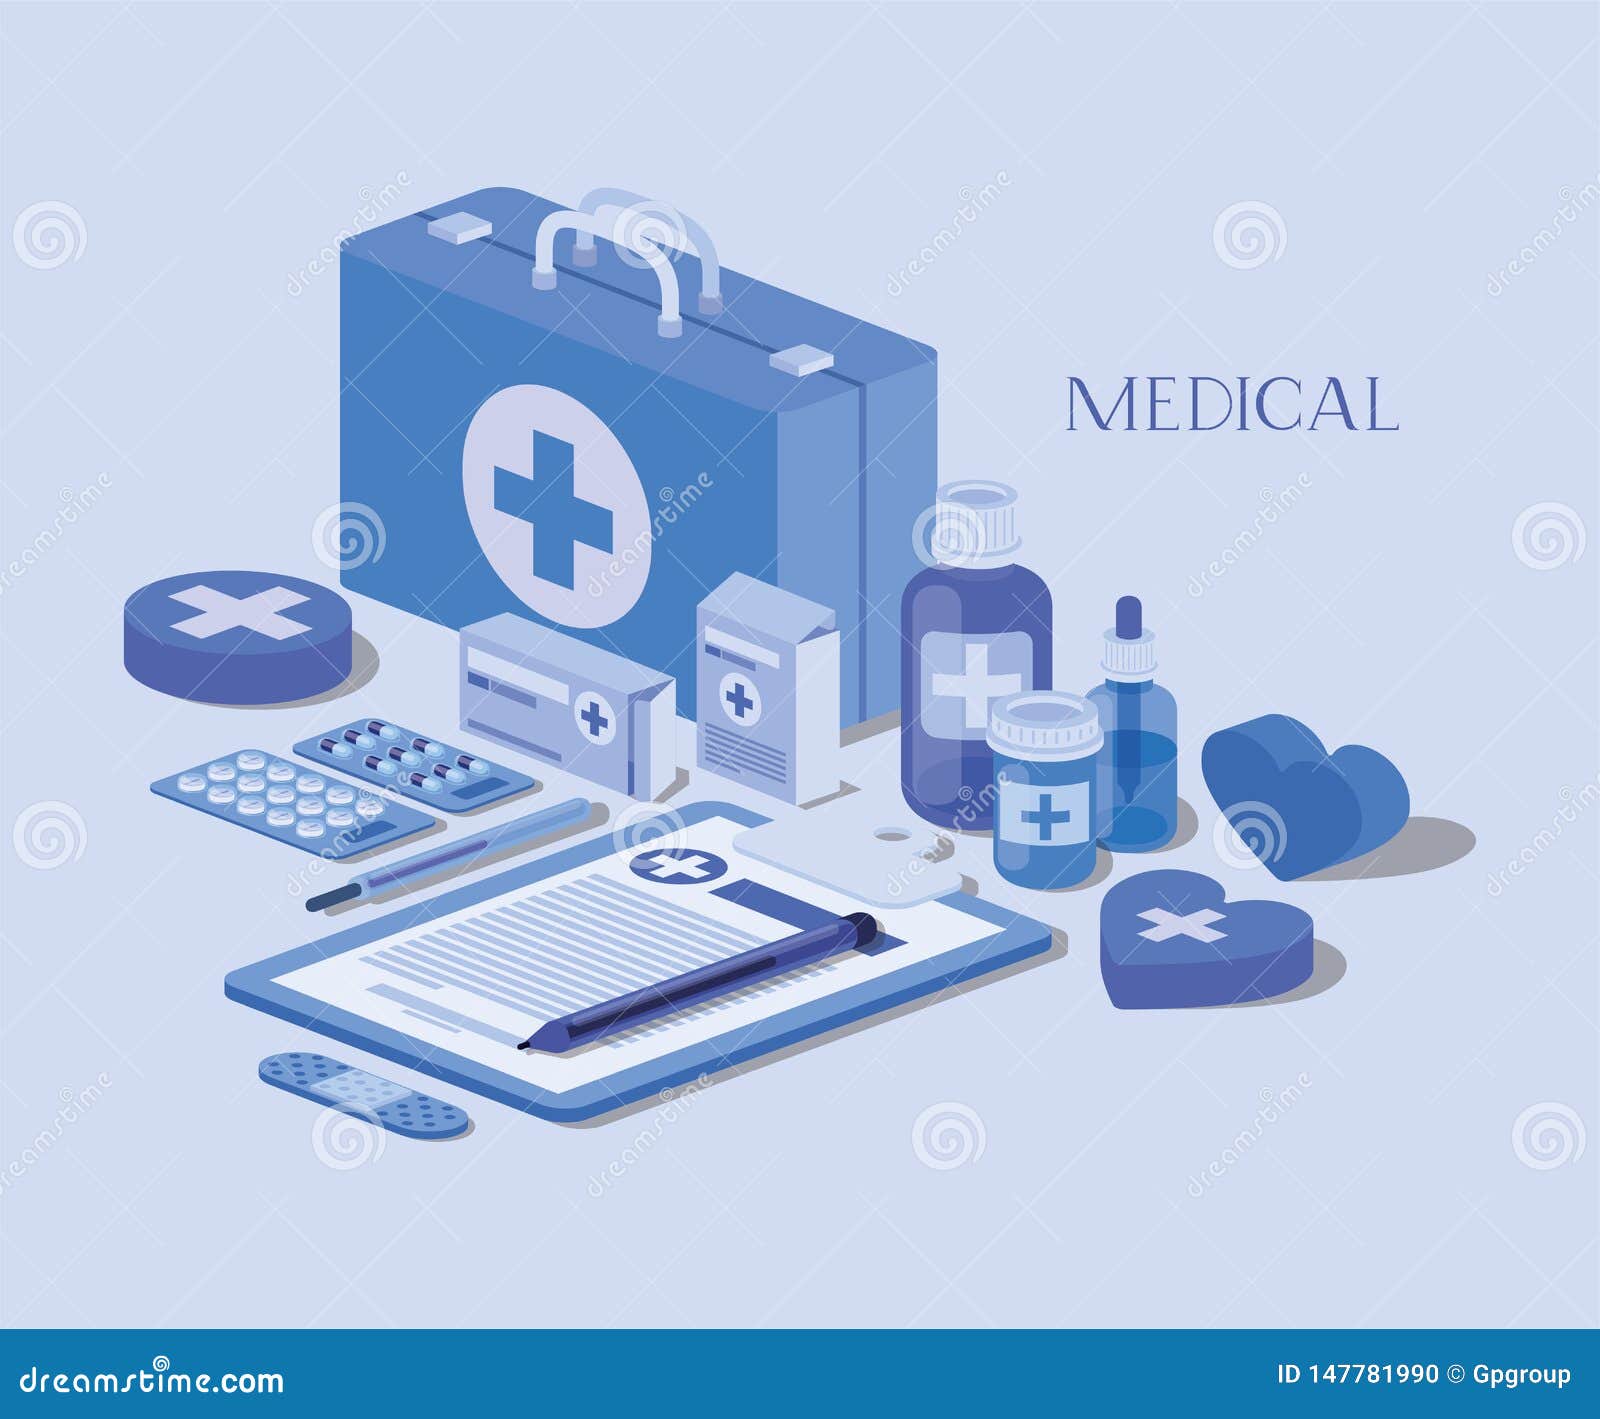 Medical Kit With Order In Checklist And Set Icons Stock Vector ...